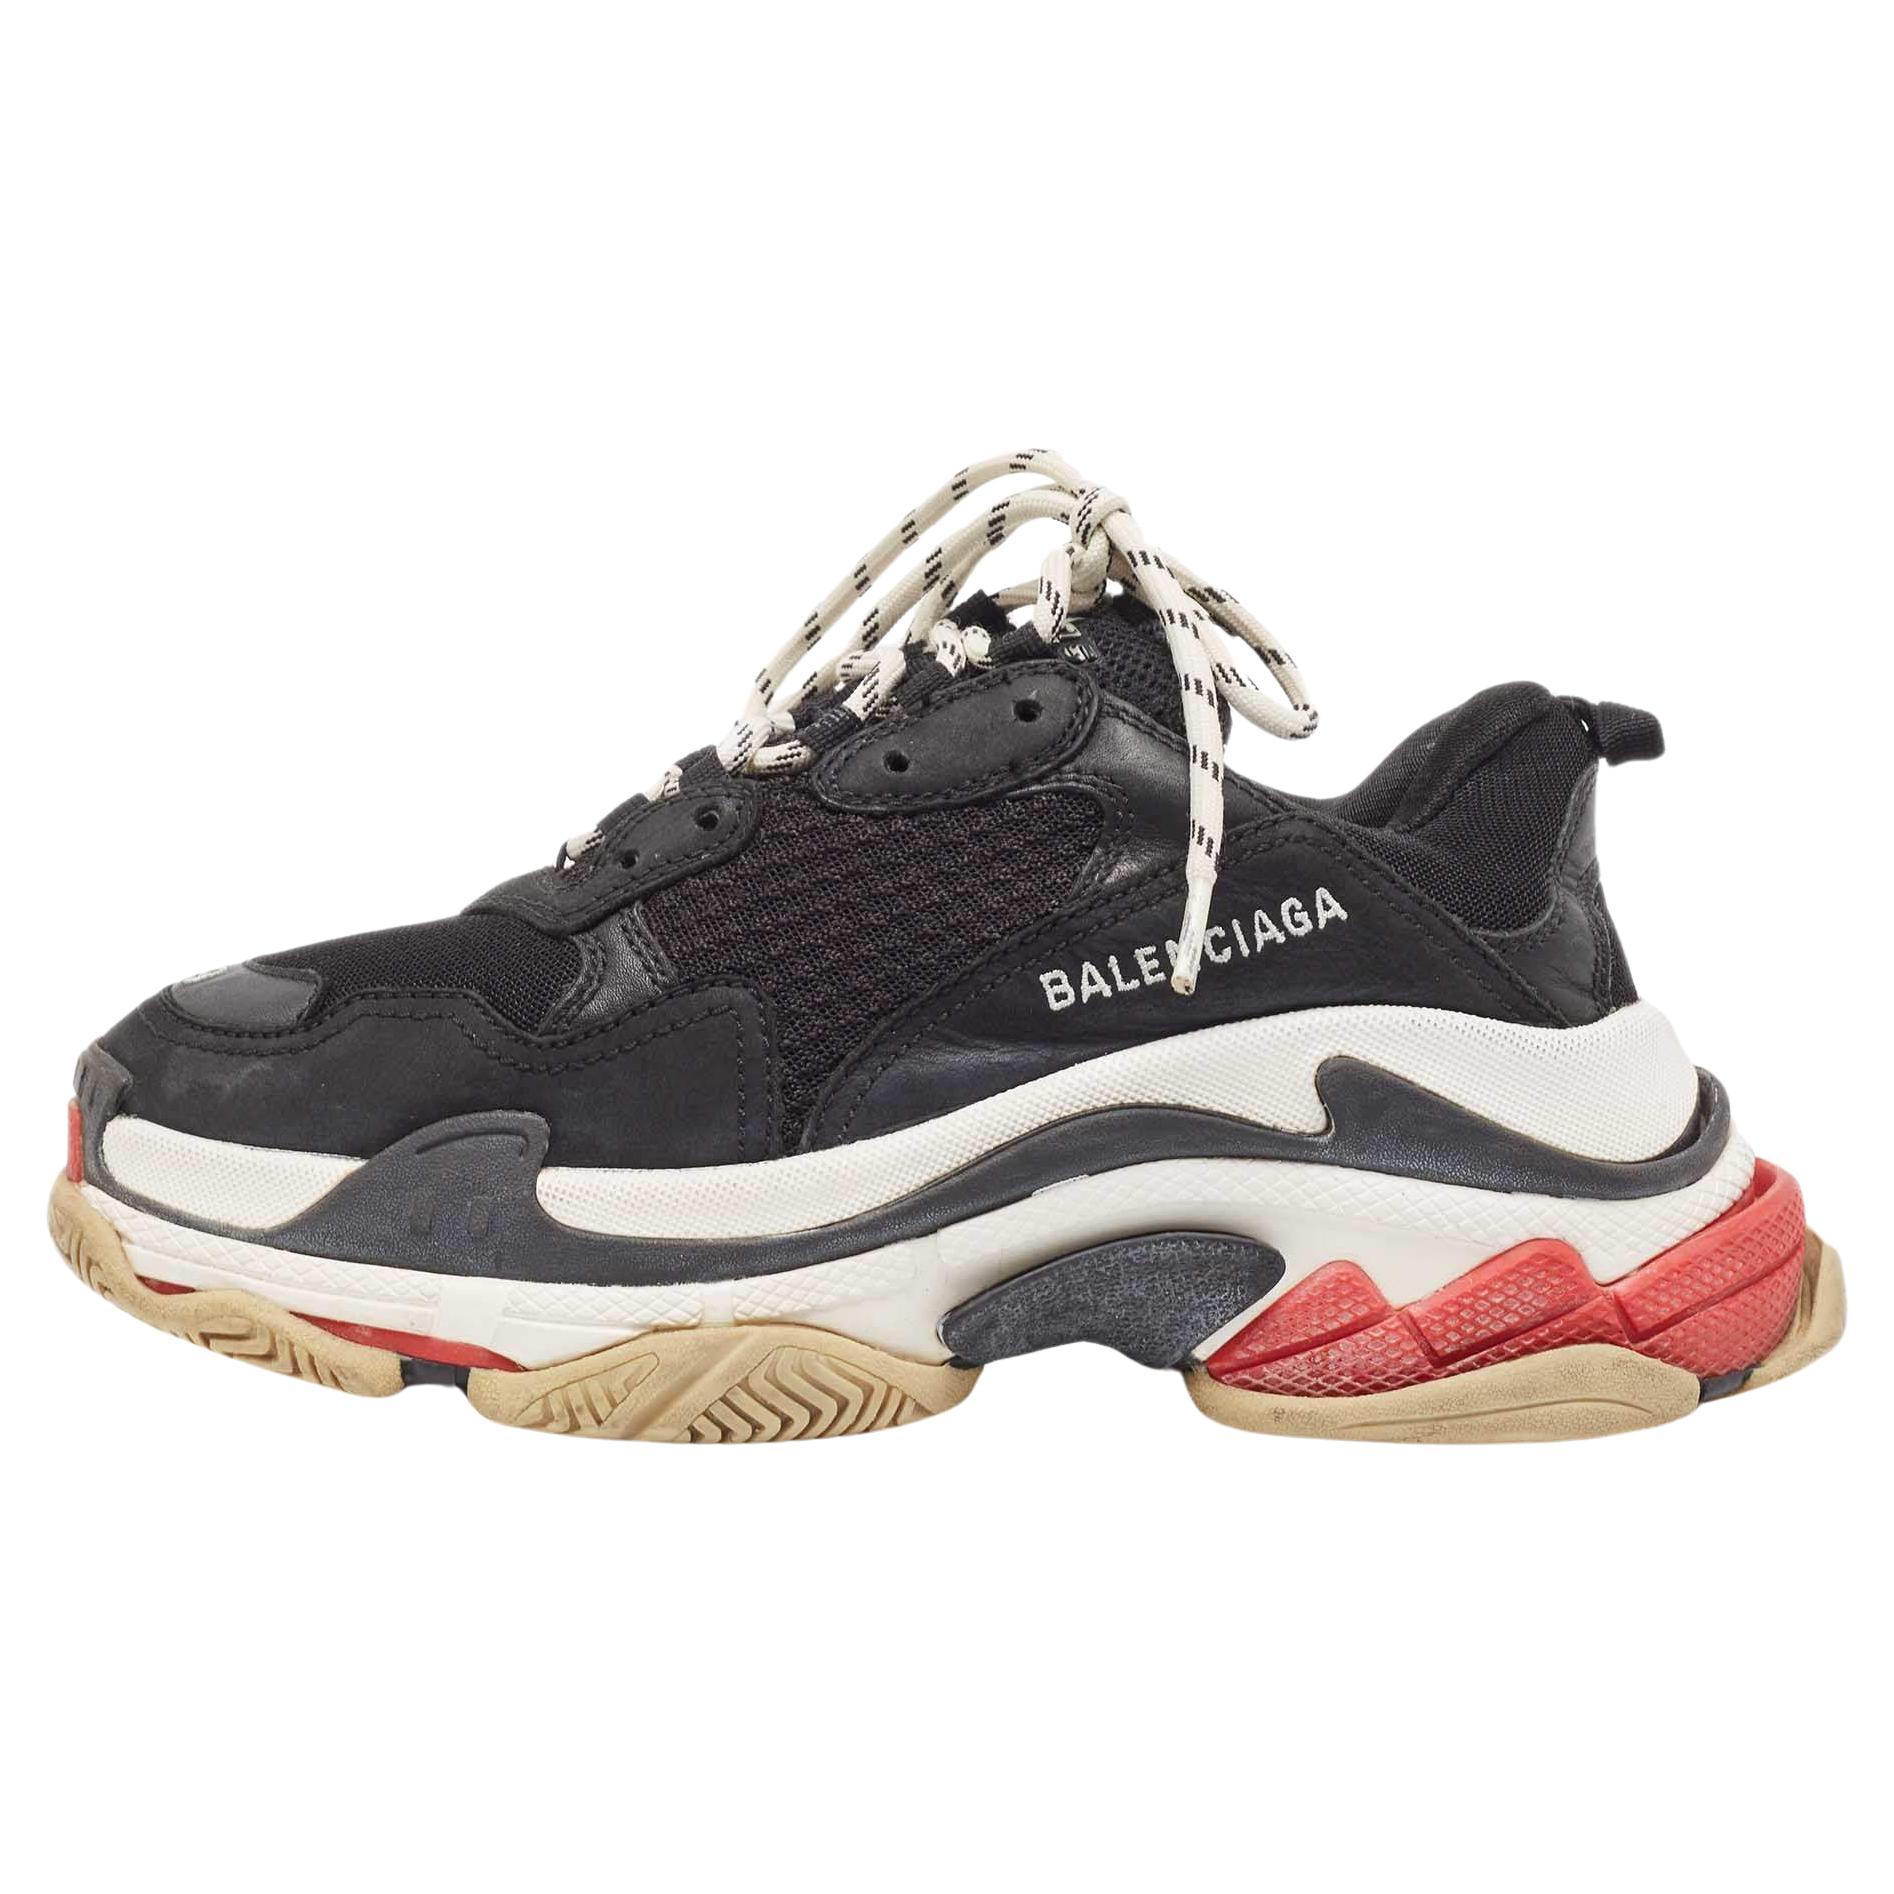 Balenciaga Black Faux Leather and Mesh Triple S Sneakers Size 39 For Sale